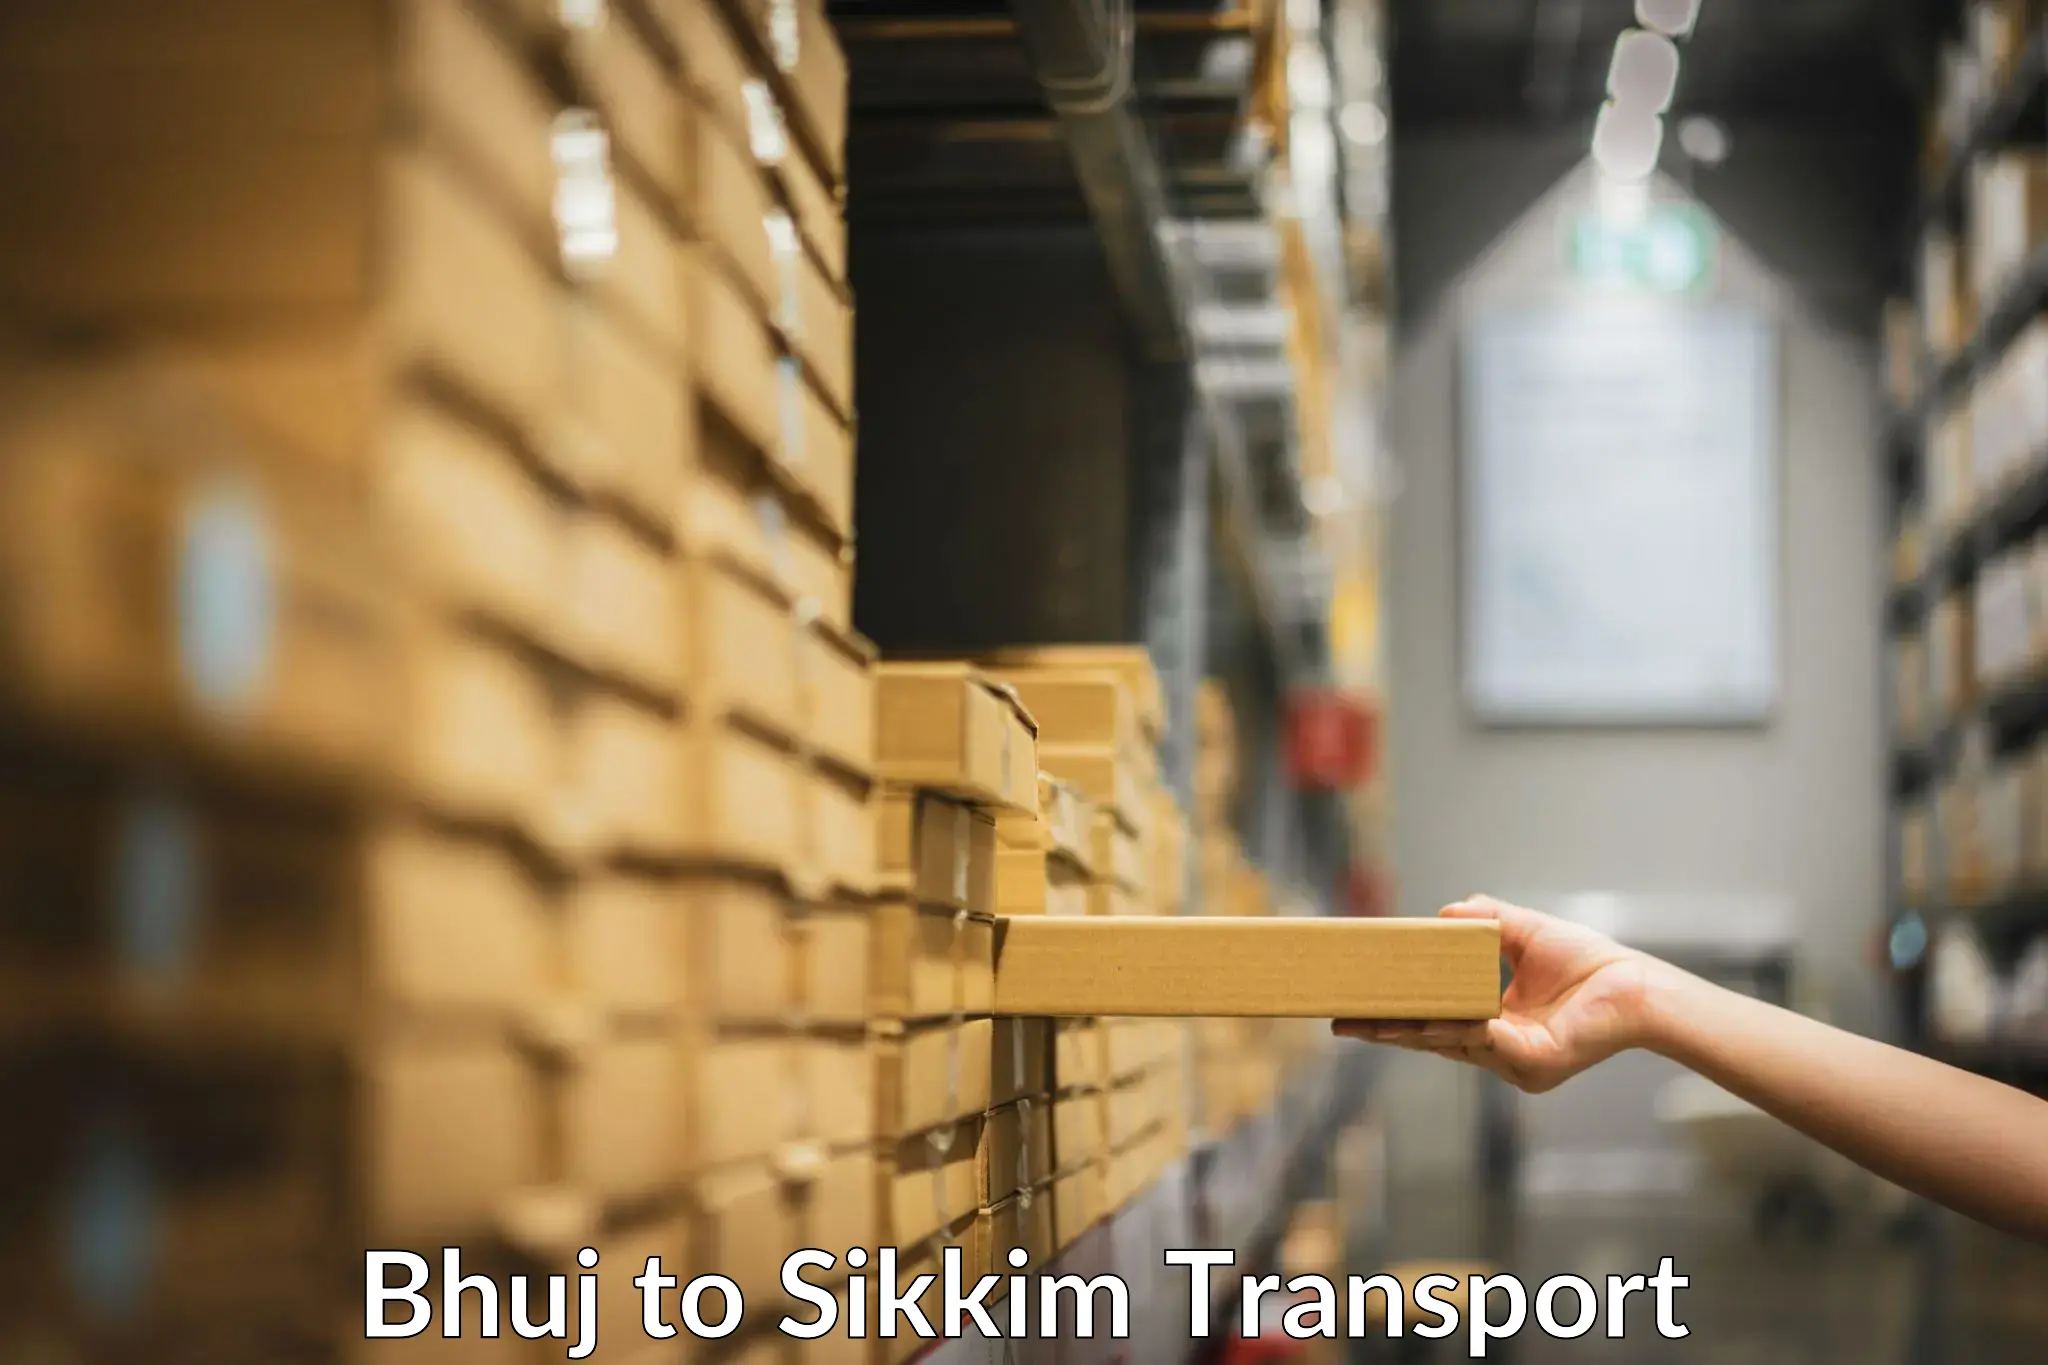 Delivery service Bhuj to East Sikkim